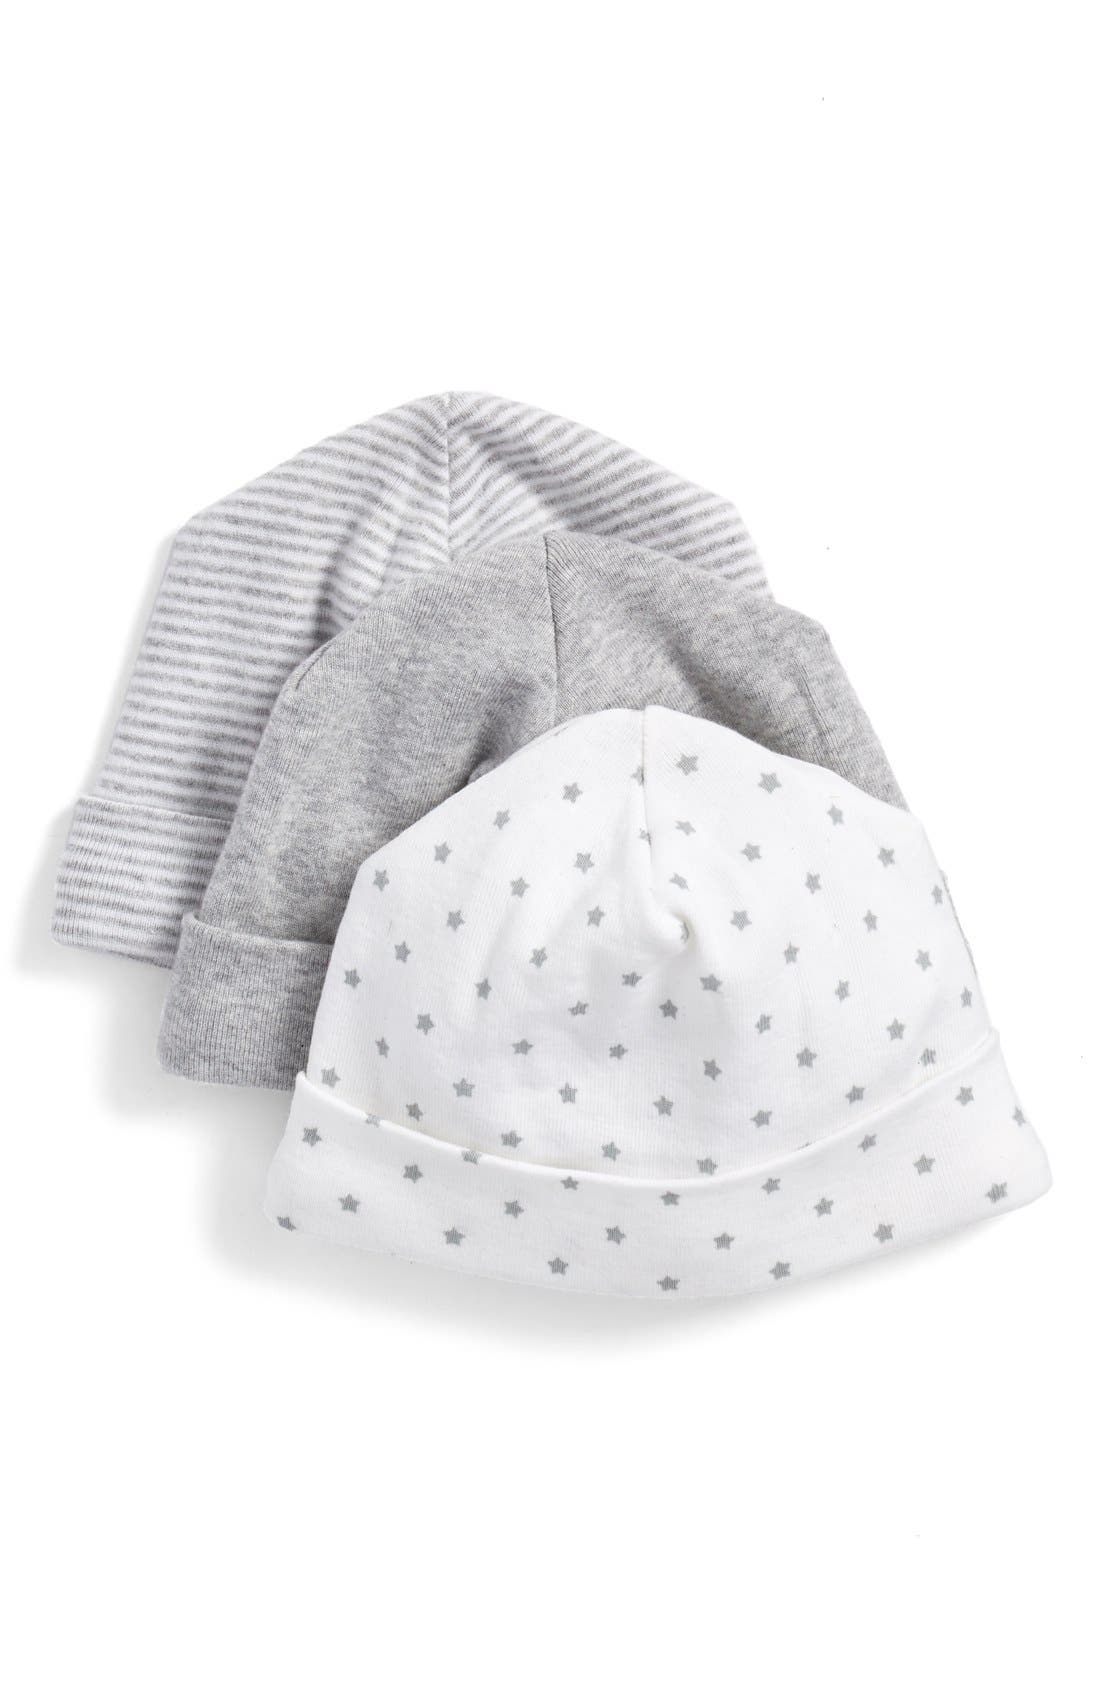 Nordstrom Baby Cotton Hats (3-Pack 